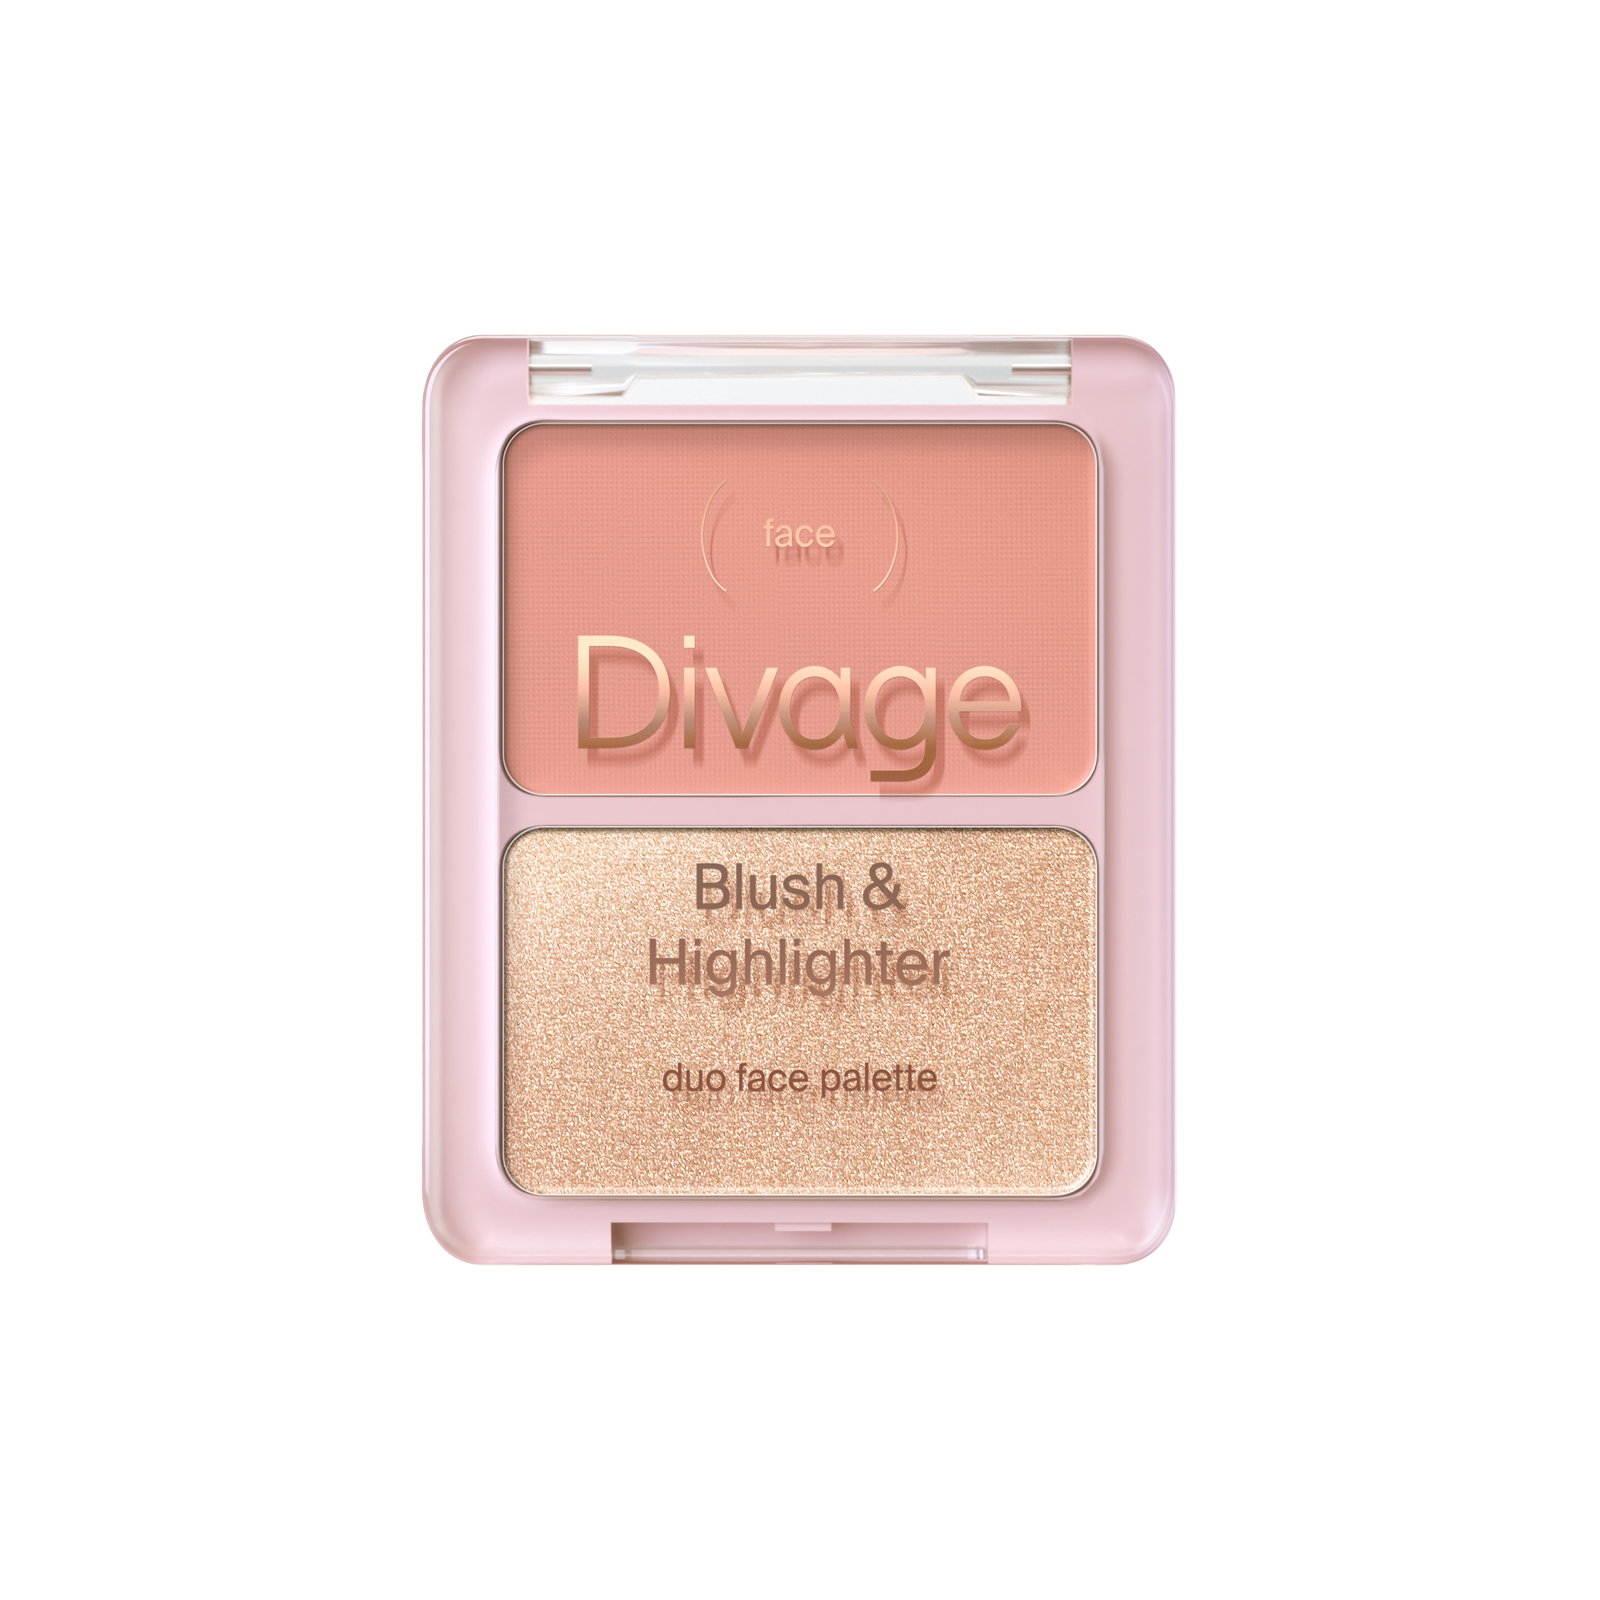    Blush & Highlighter Duo Face Palette.  01